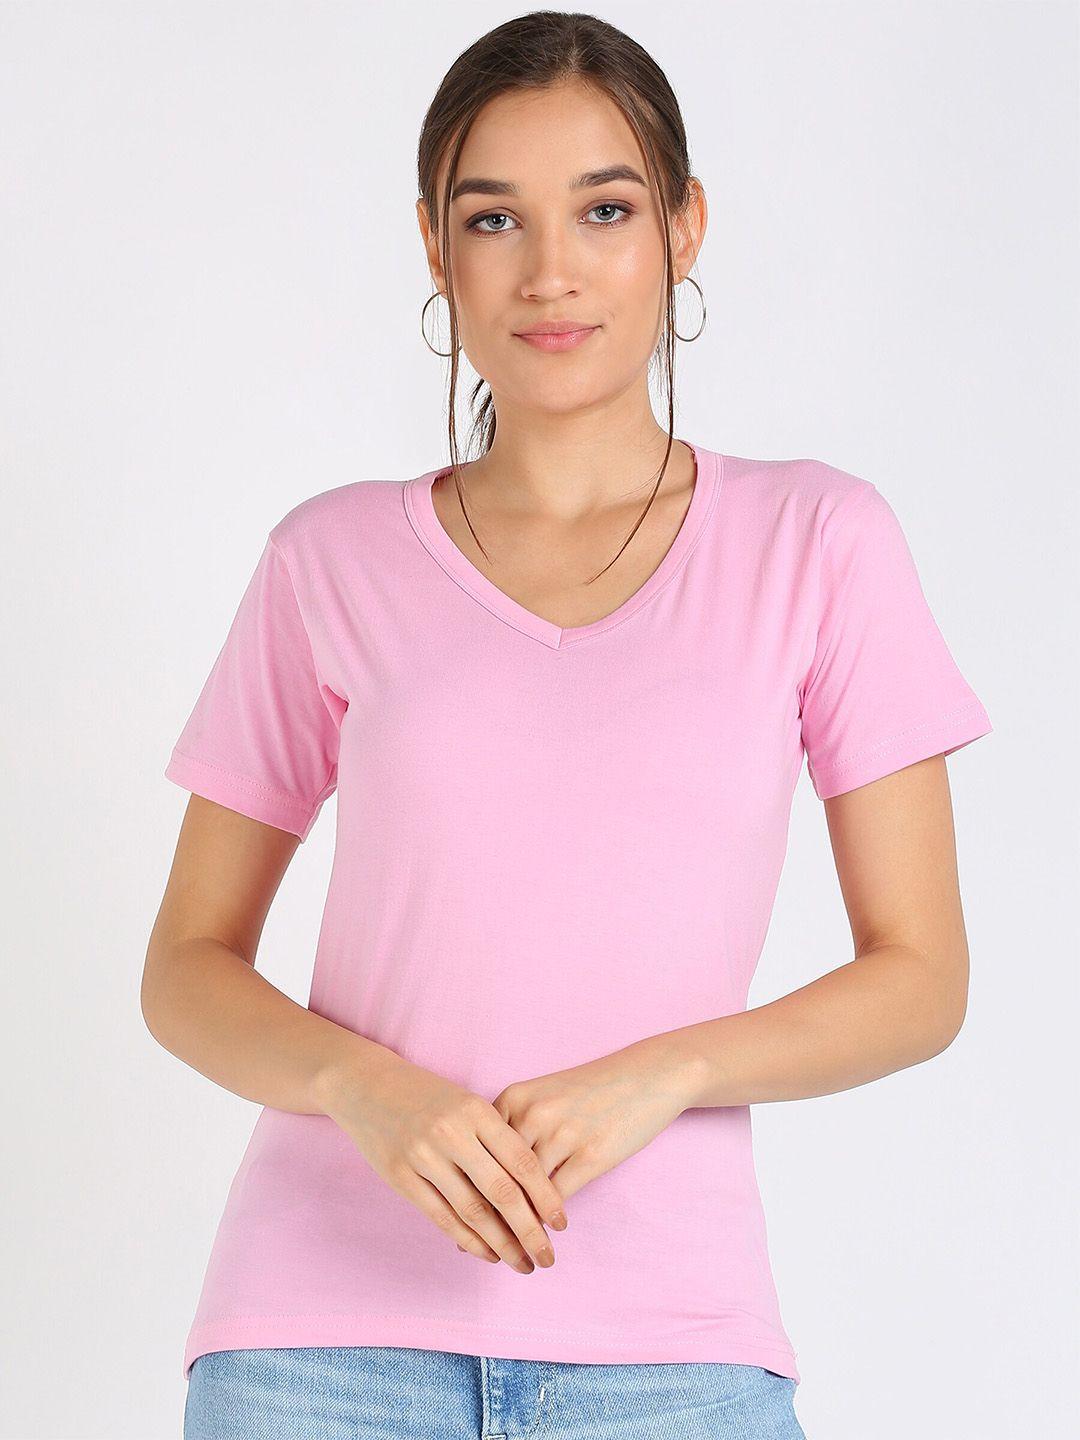 vahson women pink v-neck extended sleeves pure cotton pockets slim fit t-shirt